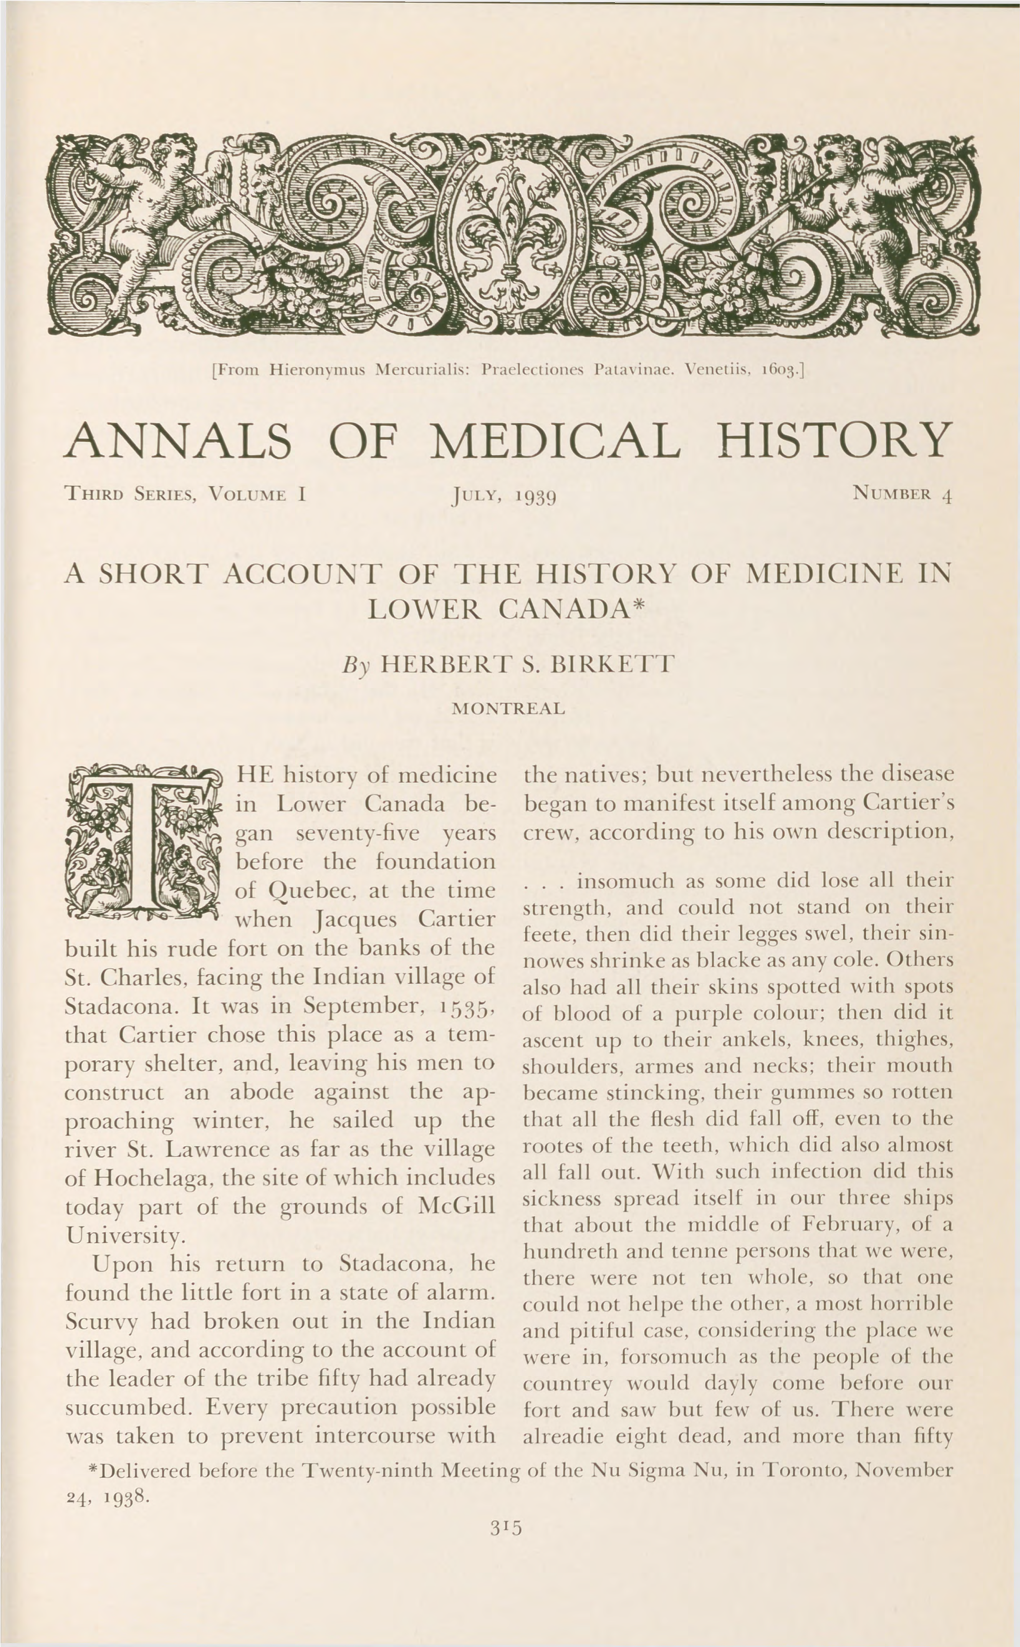 A Short Account of the History of Medicine in Lower Canada*